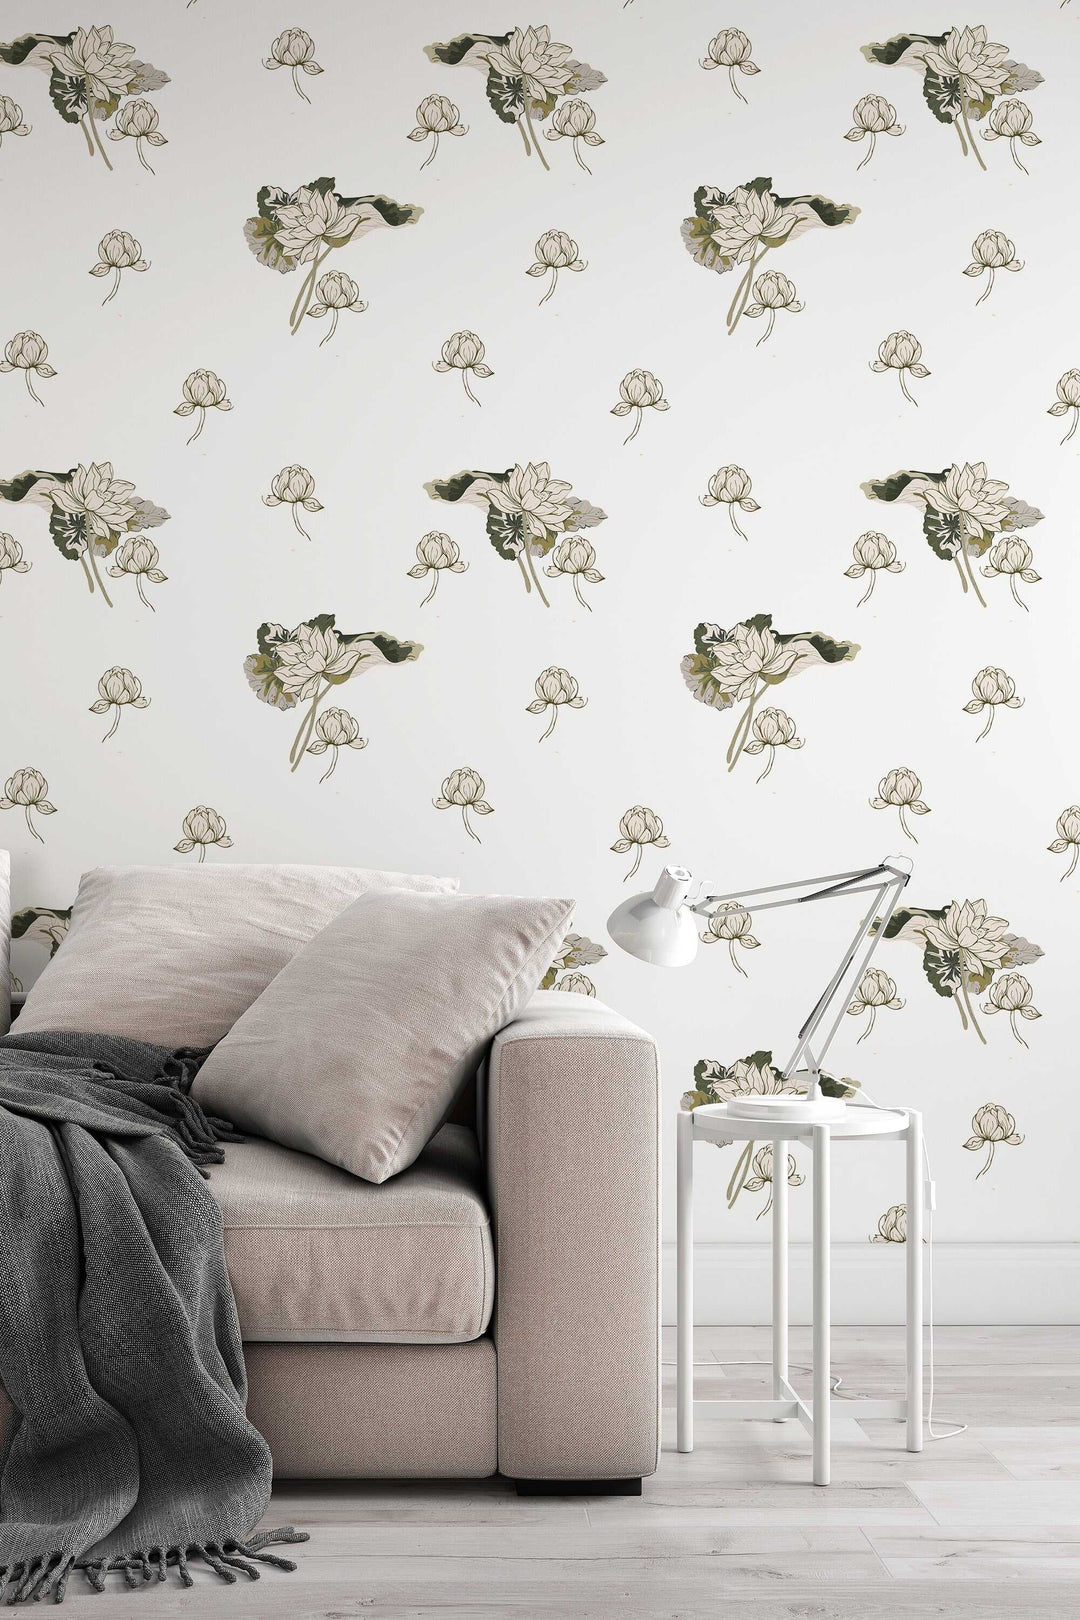 Lotus white wall mural, peel and stick wallpaper, wall decor design#3109